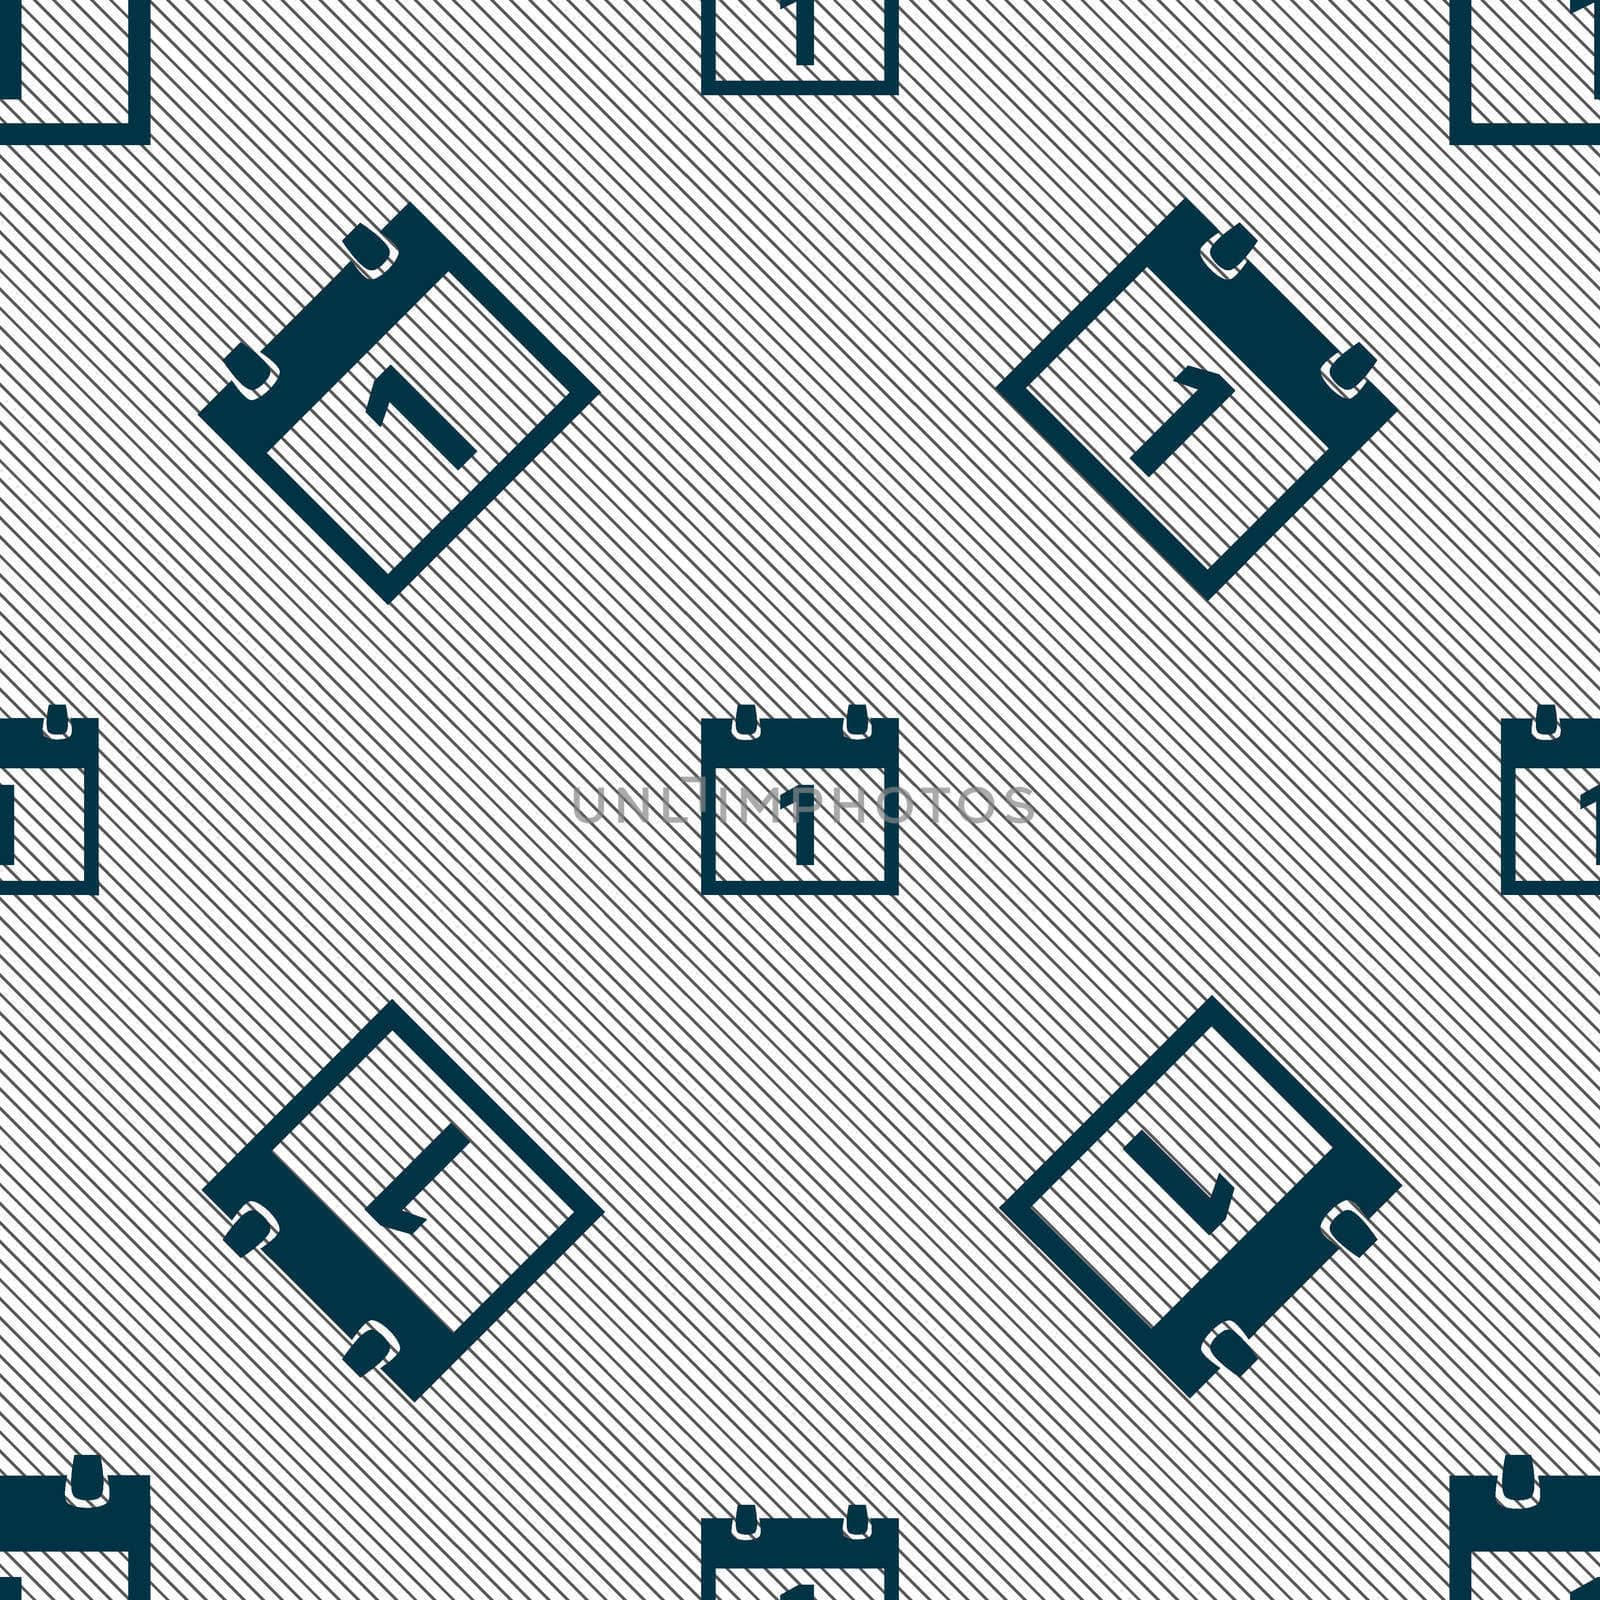 Calendar sign icon. 1 day month symbol. Date button. Seamless pattern with geometric texture. illustration